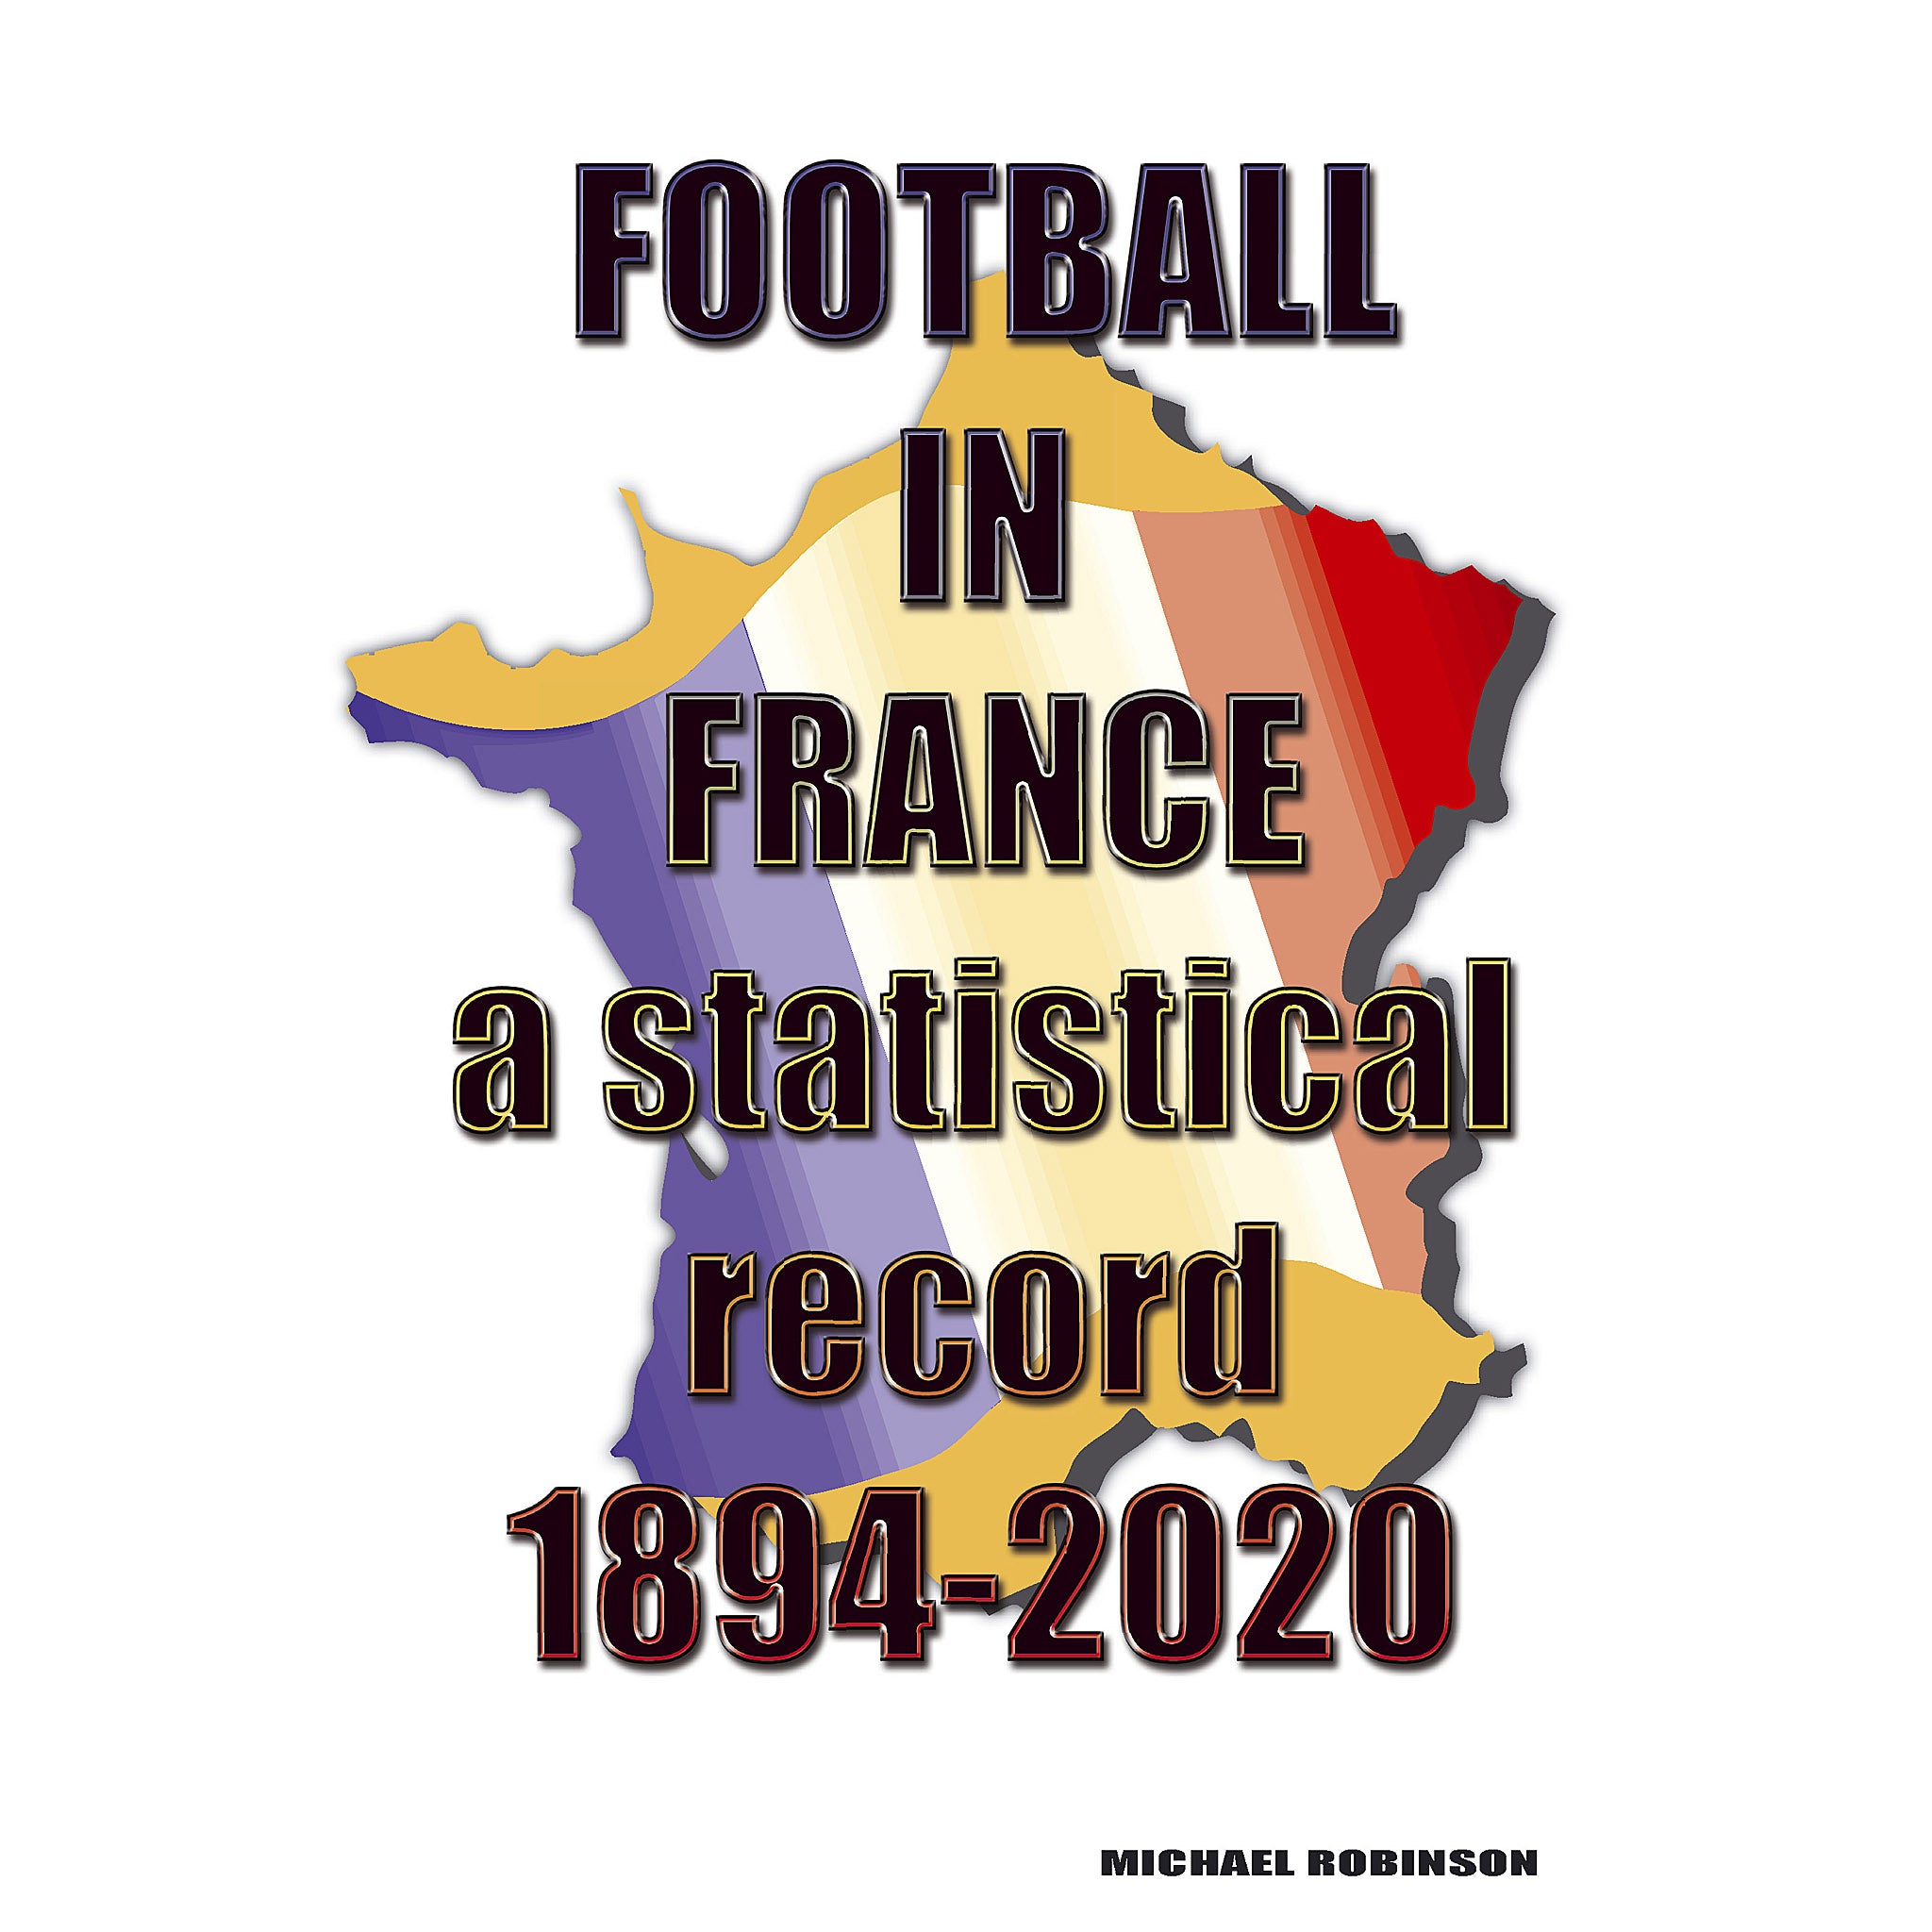 Football in France 1894-2020 – a statistical record